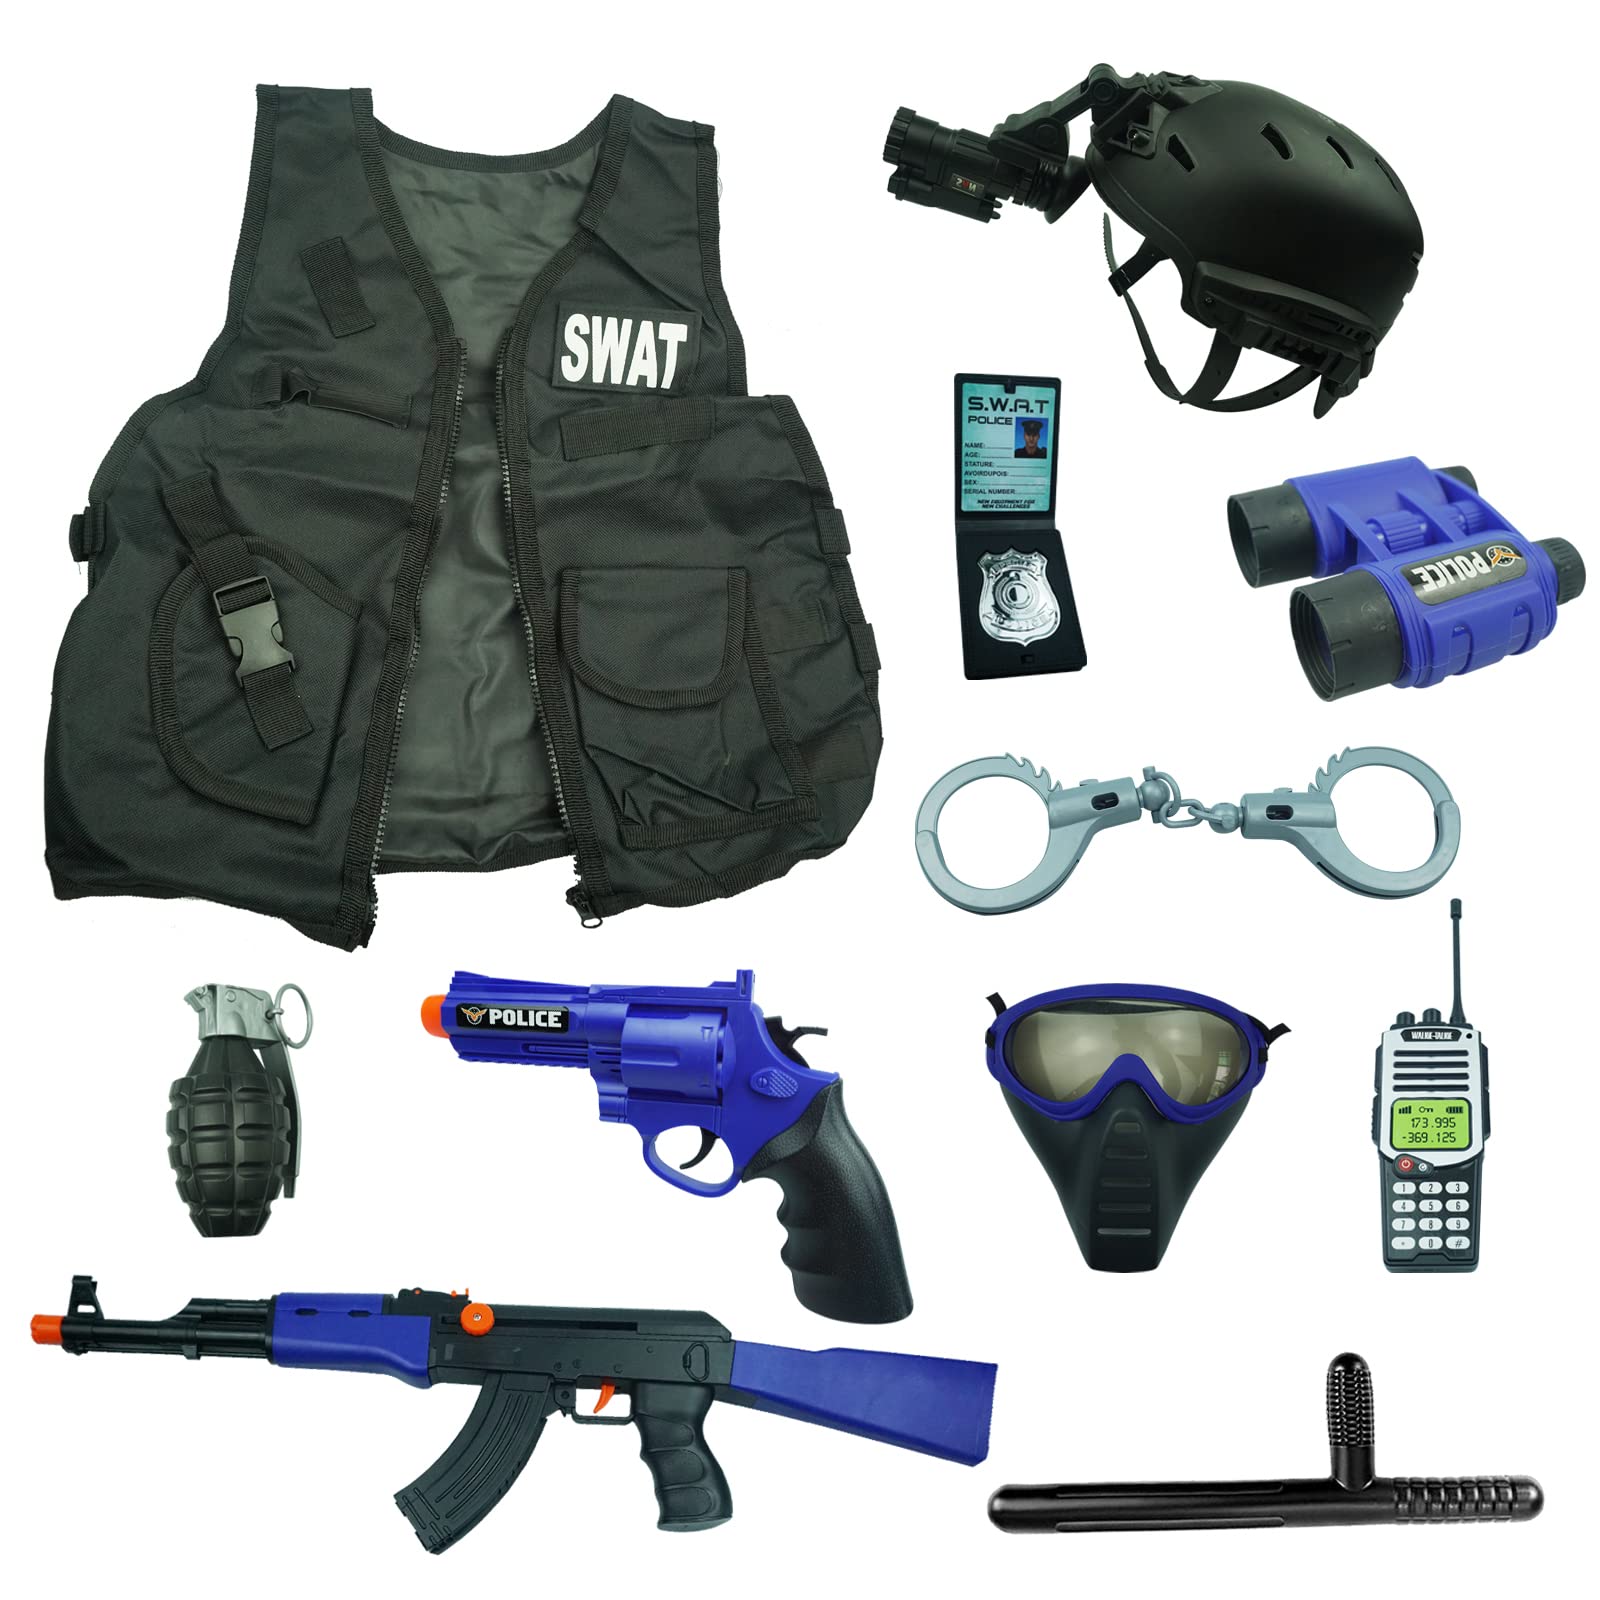 RedCrab Kids Police Officer Pretend Set Uniform Outfit Role-playing Toys - chirldren costumes boys and girls - SWAT Police Gear 